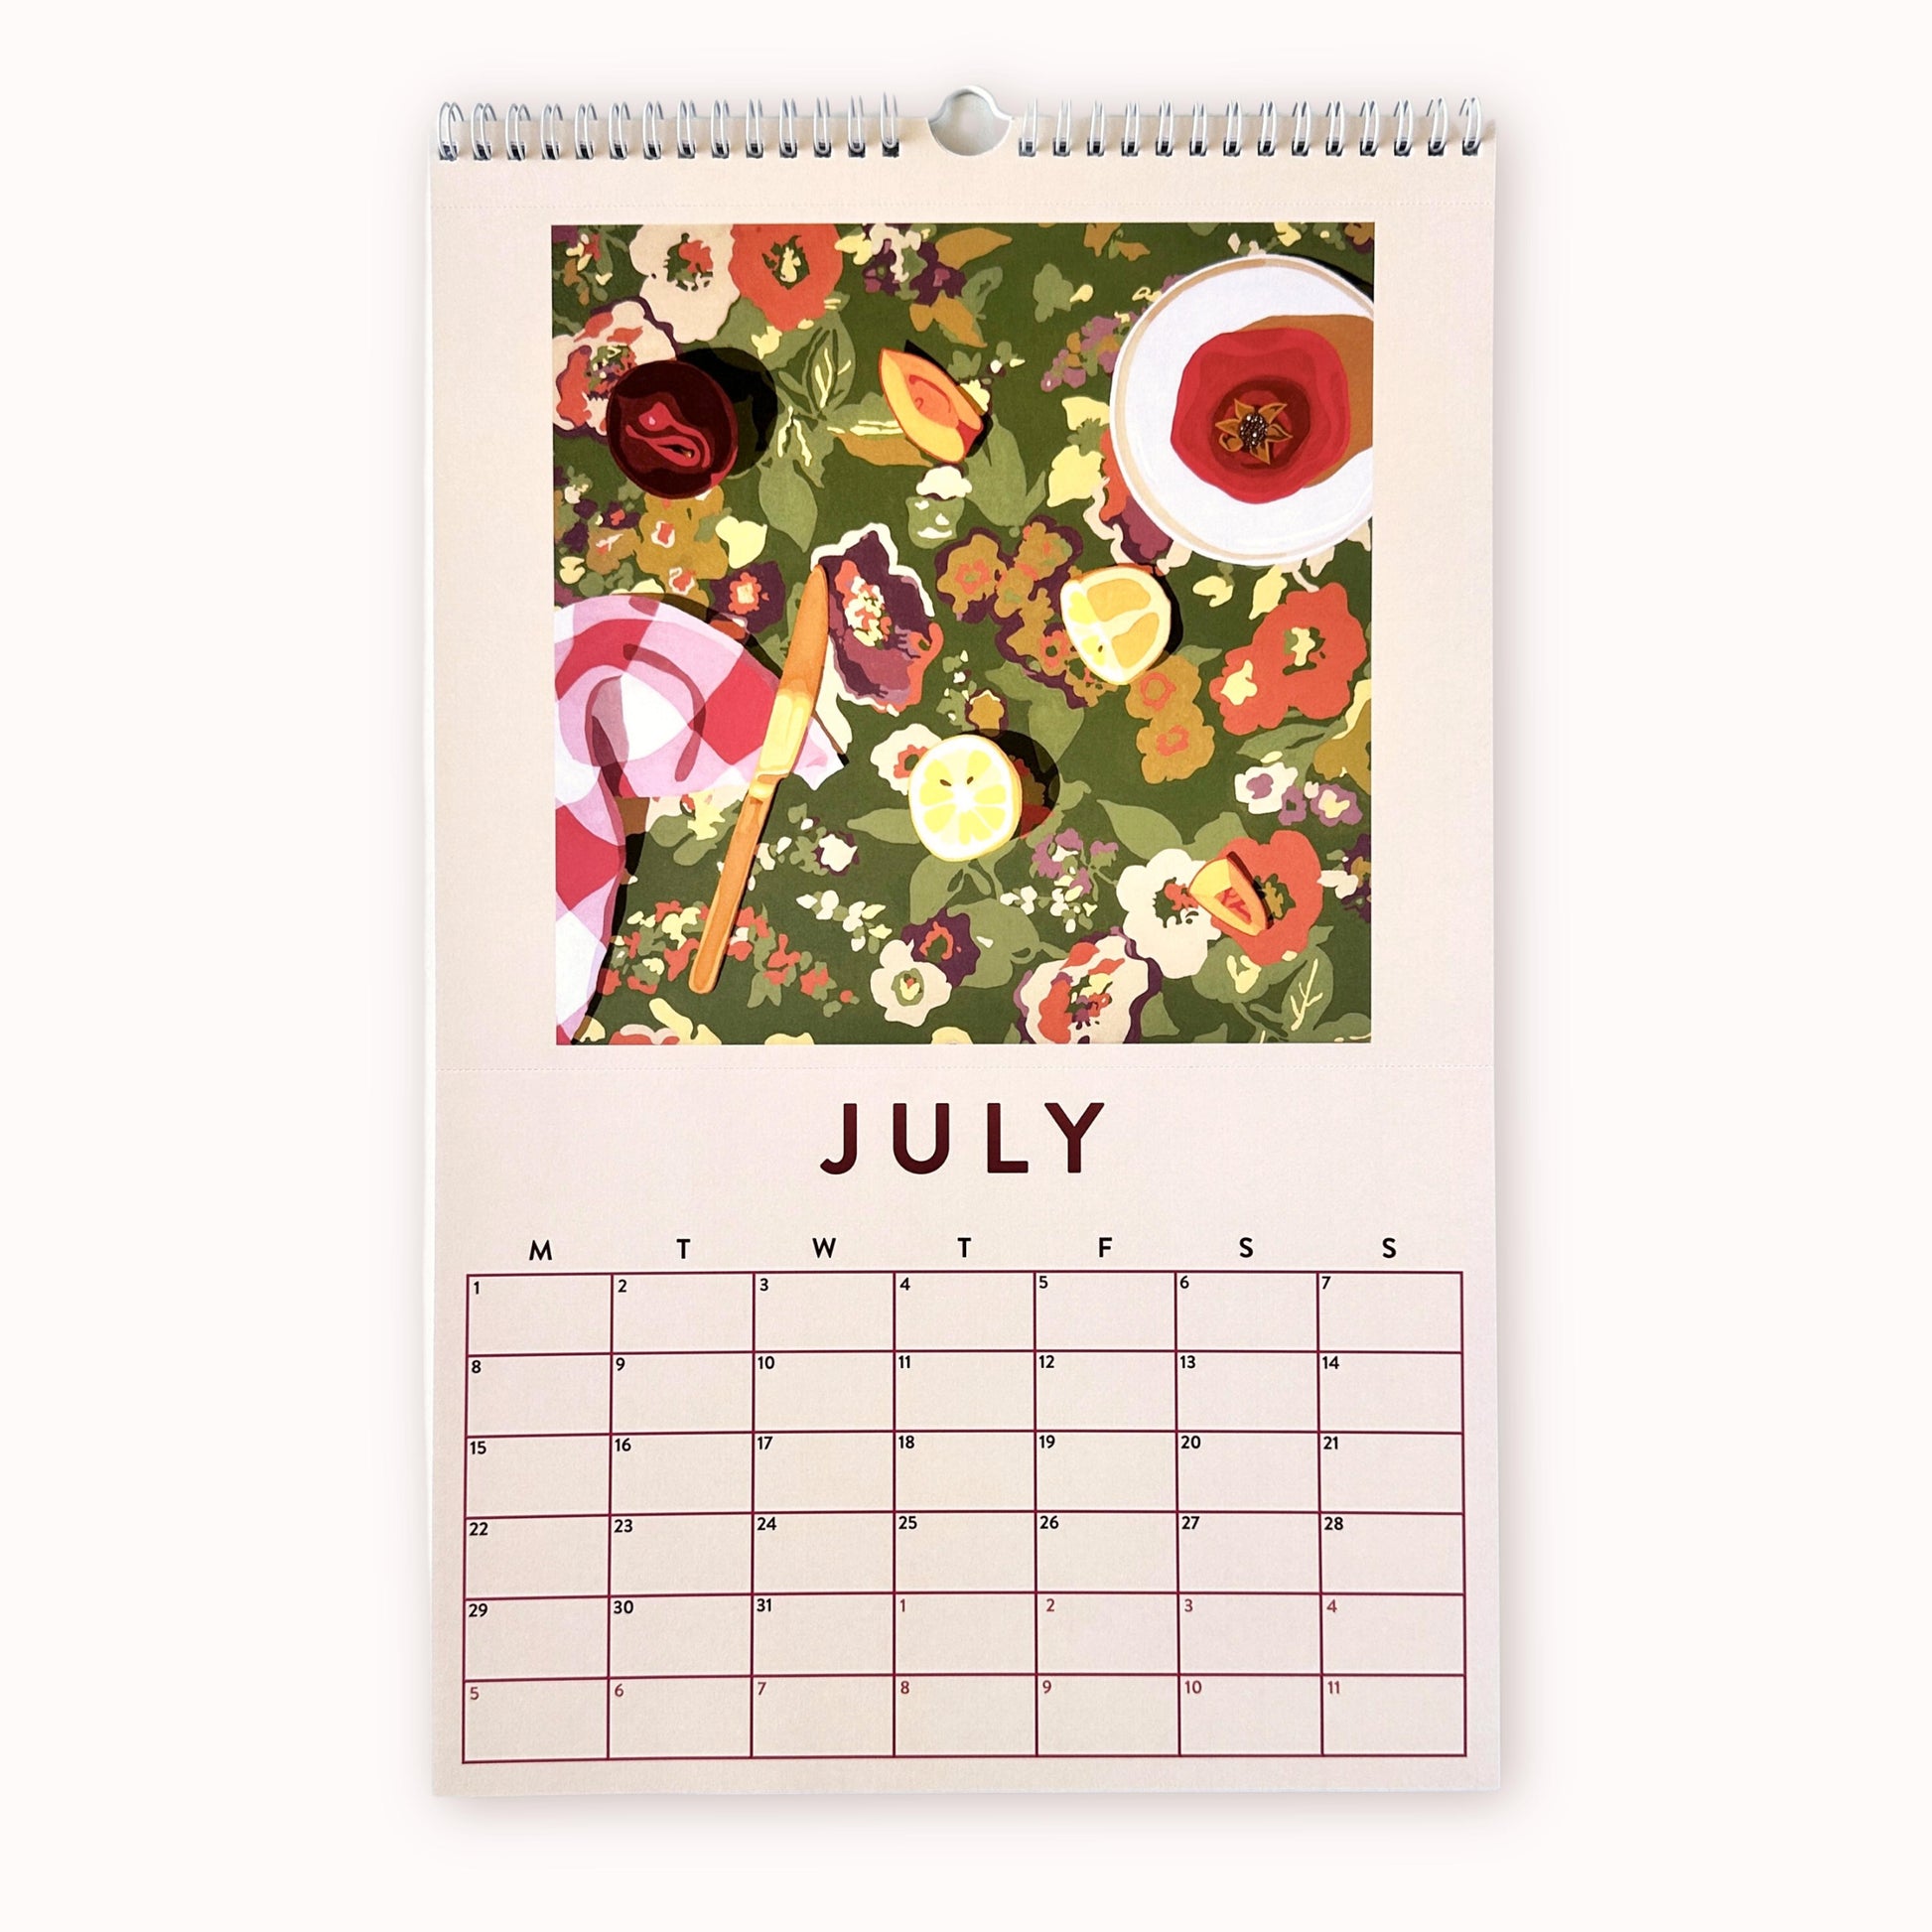 2024 art wall calendar in A3 size for the month of July, featuring a still life oil painting of fruits such as pomegranates with seeds, plum, lemon slices and peach slices, and a chequered tea towel with a knife on a floral green, purple, coral orange mustard patterned background